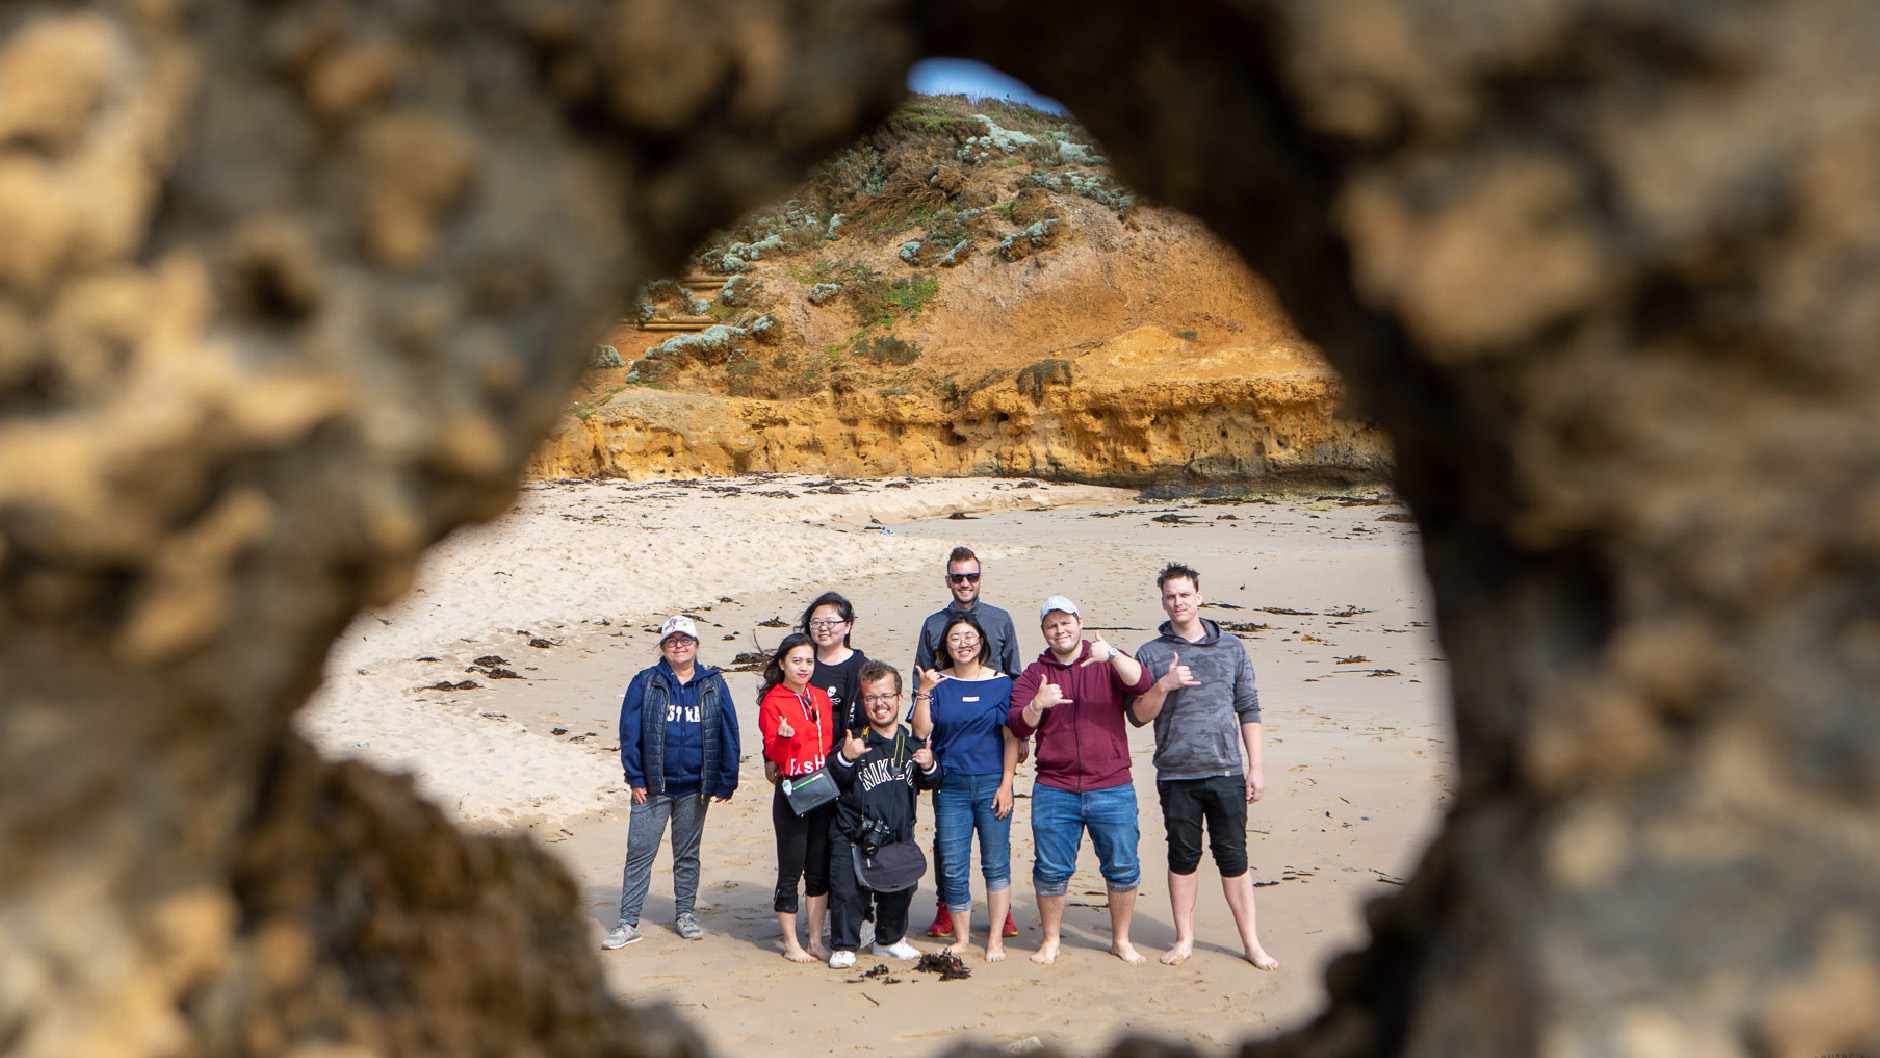 Join us on the perfect road trip for the backpackers, international students and young traveller, taking in all the best views and experiences along the coast!